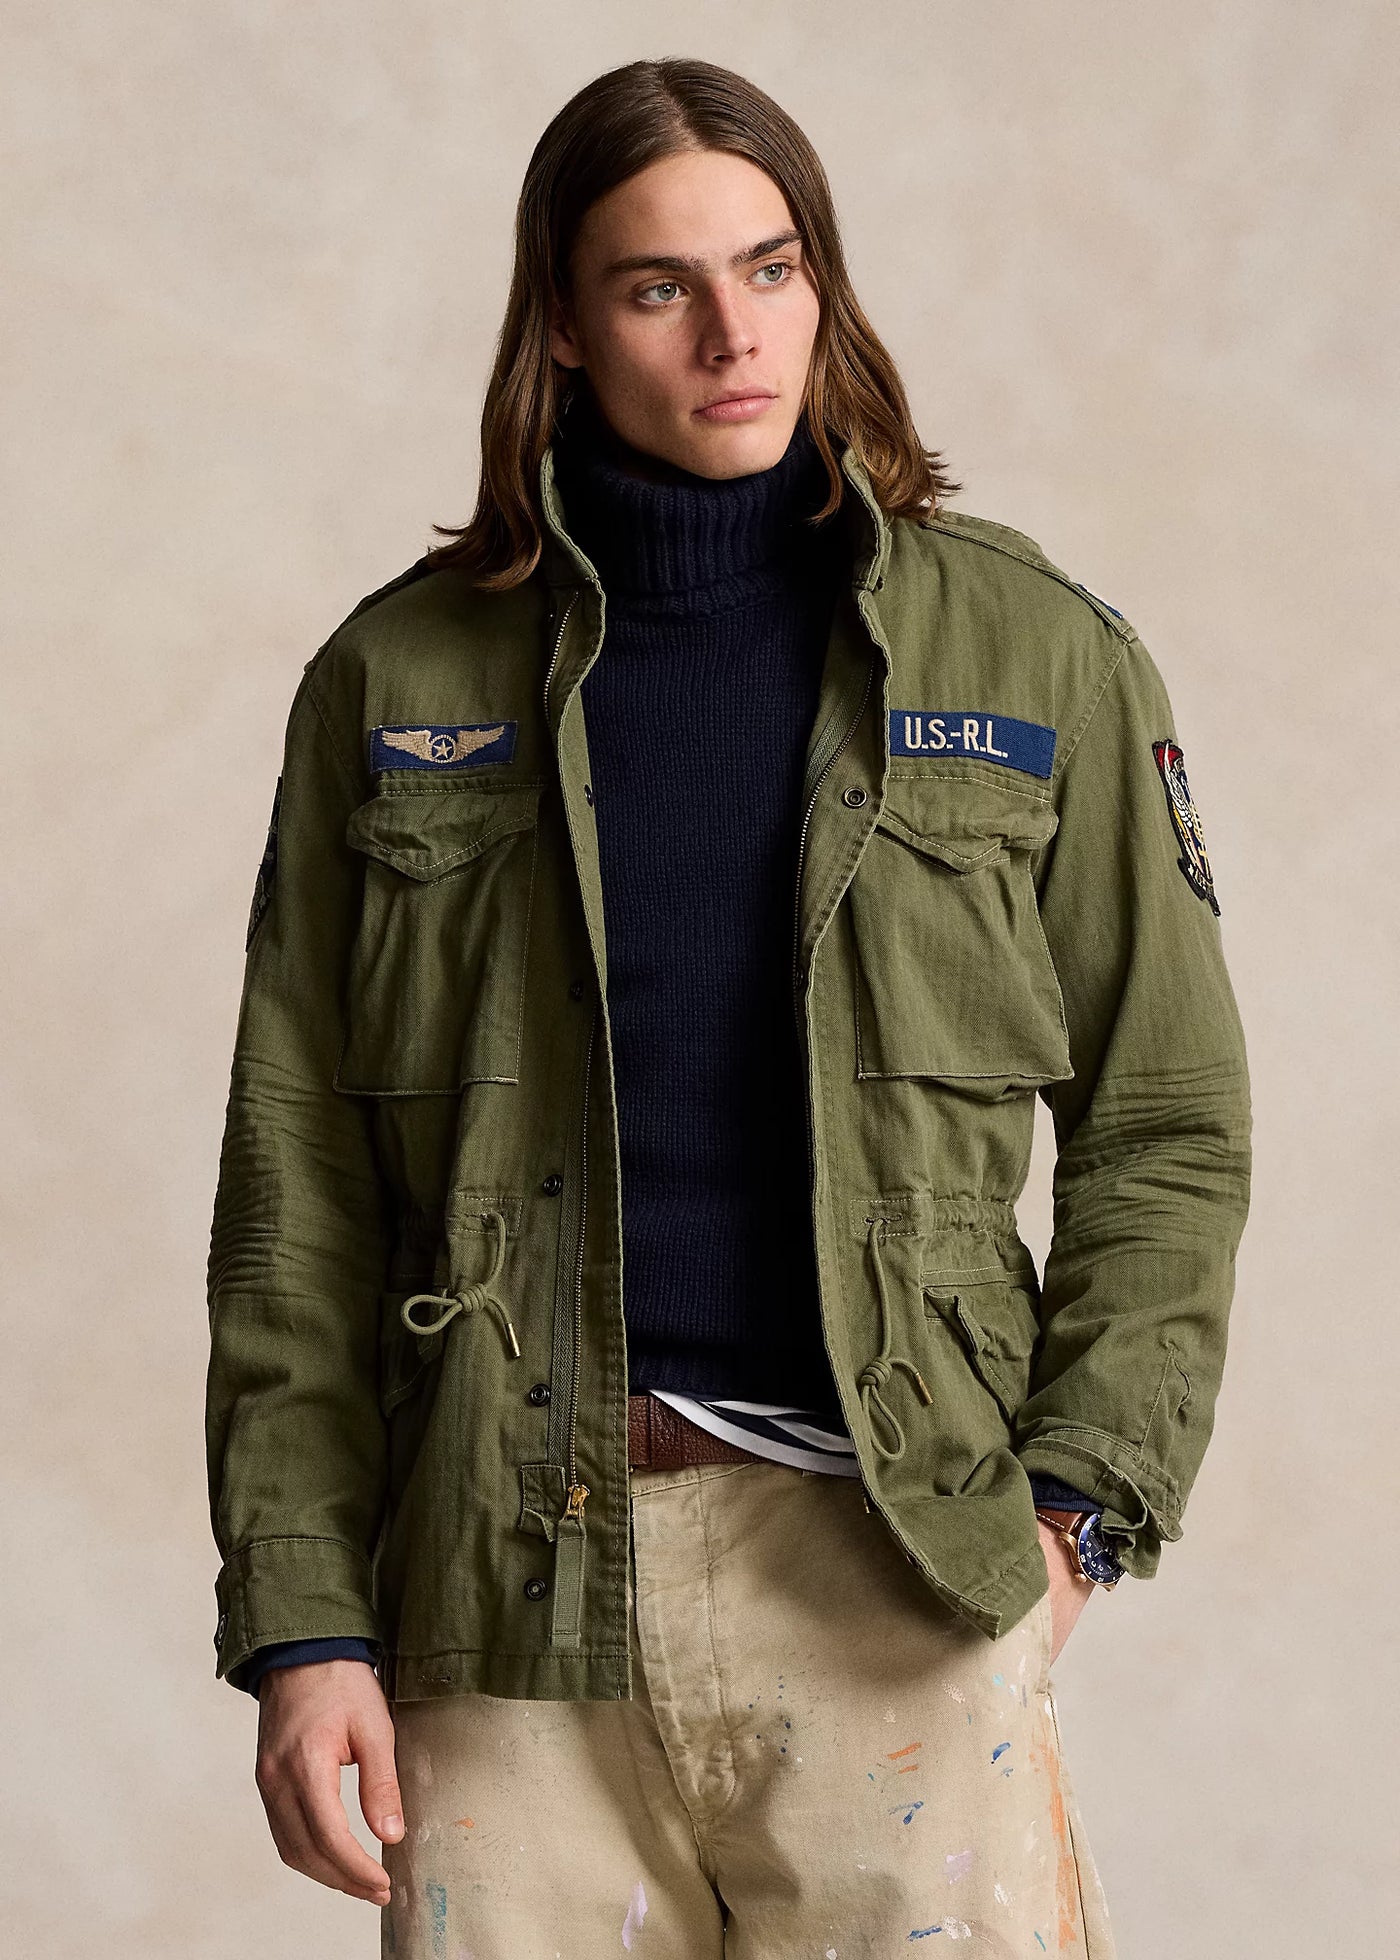 Ralph Lauren The Iconic Field Jacket | Olive Mountain